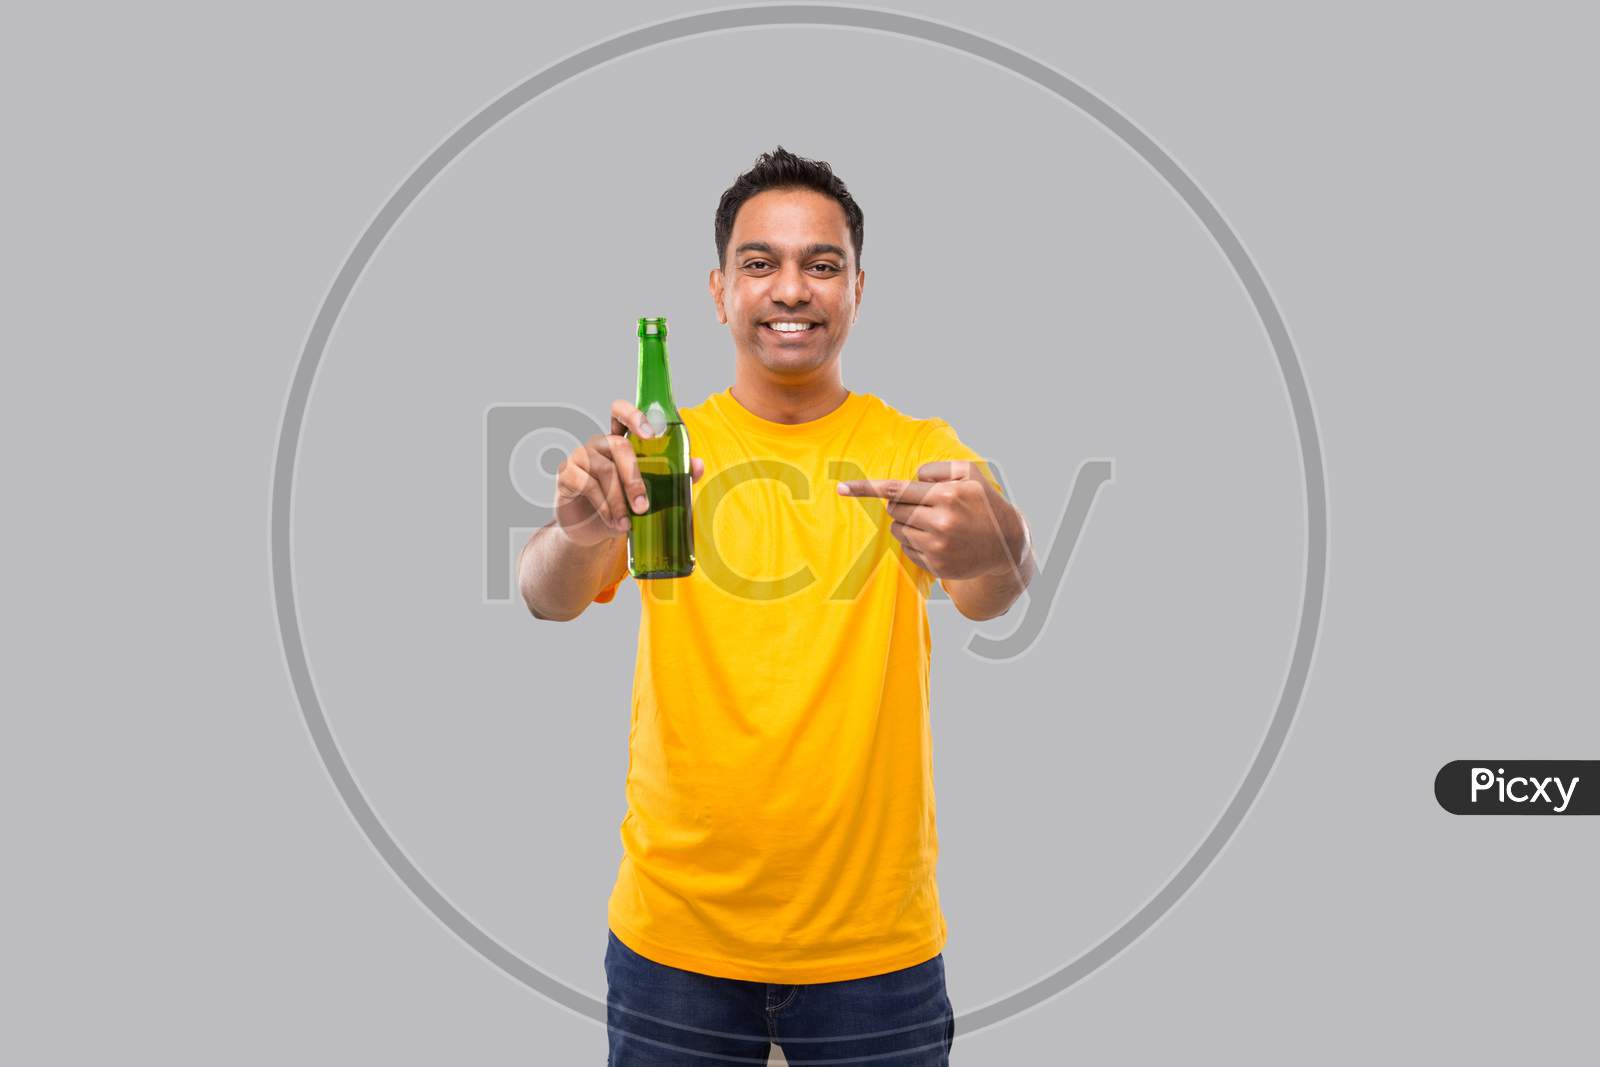 Indian Man Pointing At Beer From Beer Bottle Isolated.